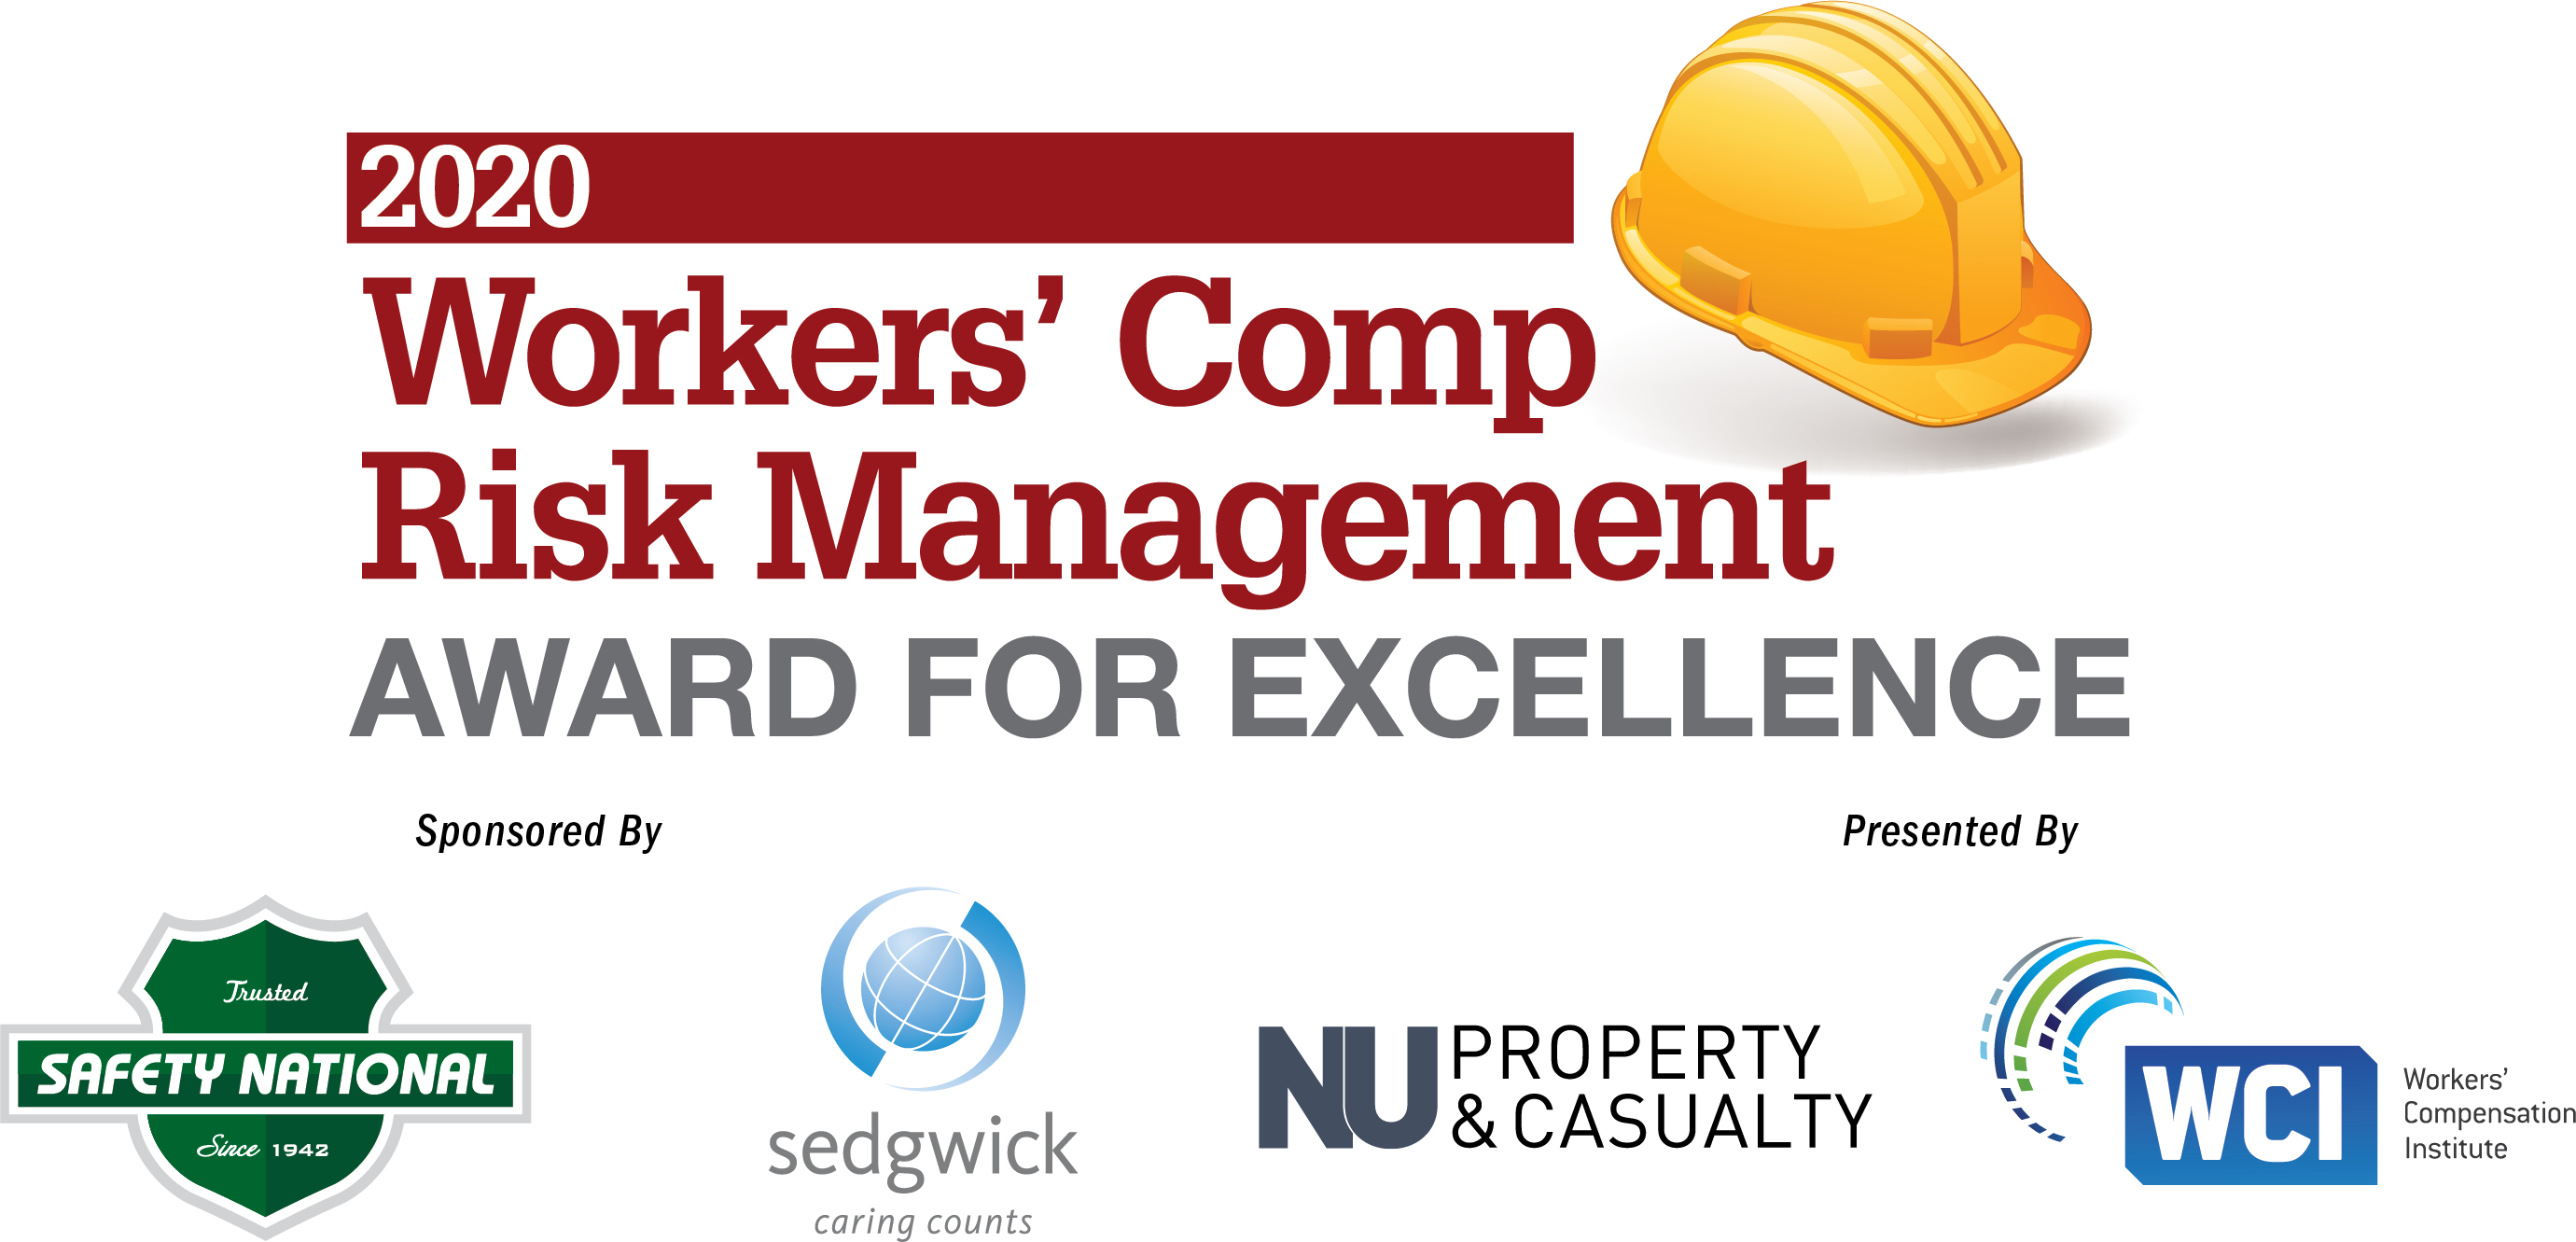 Apply Now for the 2020 Excellence in Workers' Compensation Risk Management Award